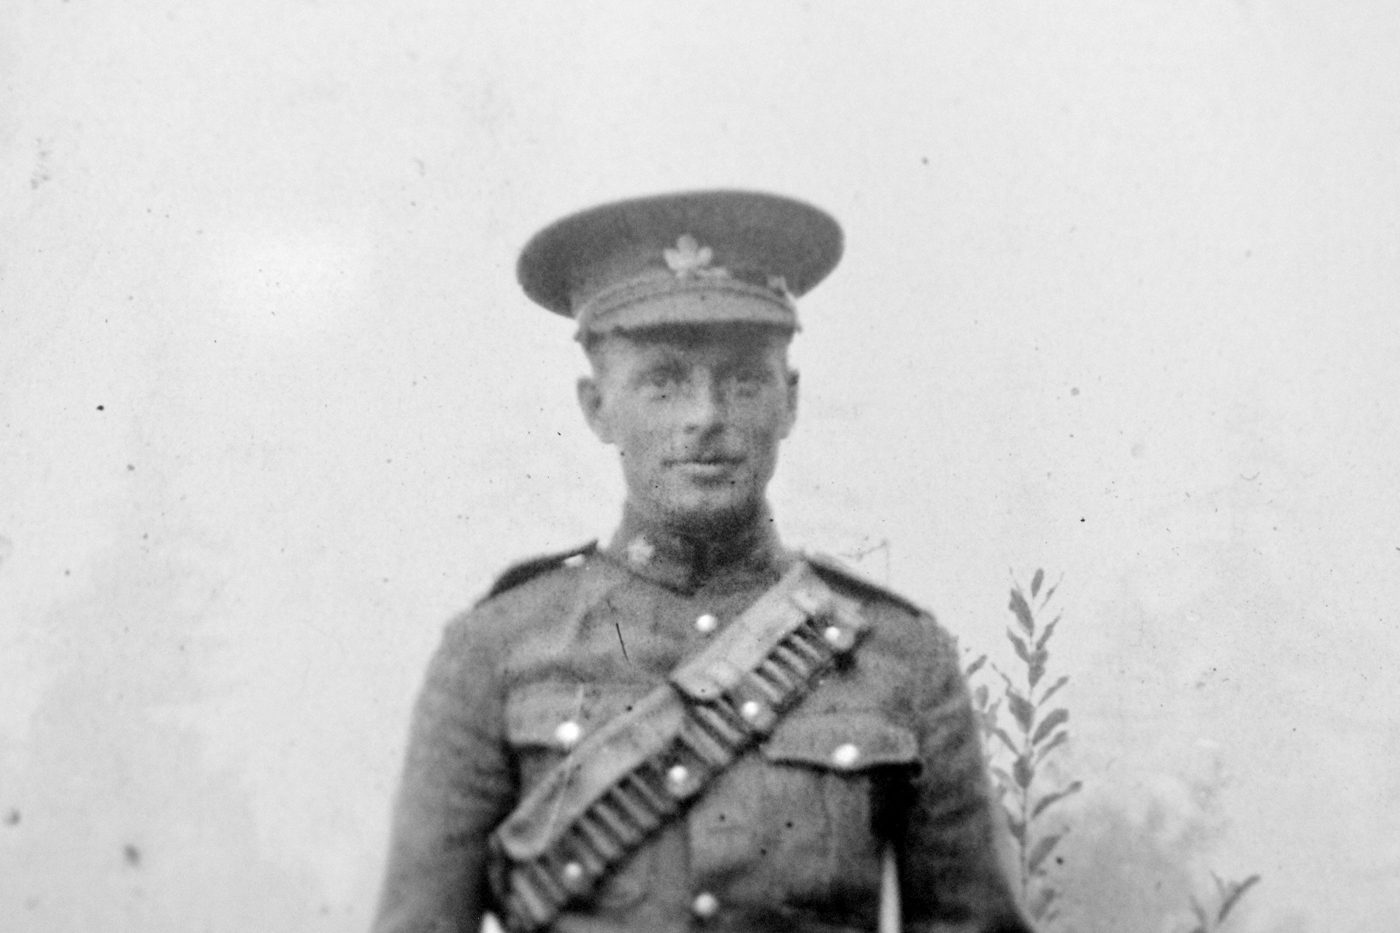 Pte Thomas Wheatley Kilby who was killed in action in France, March 27, 1917. 